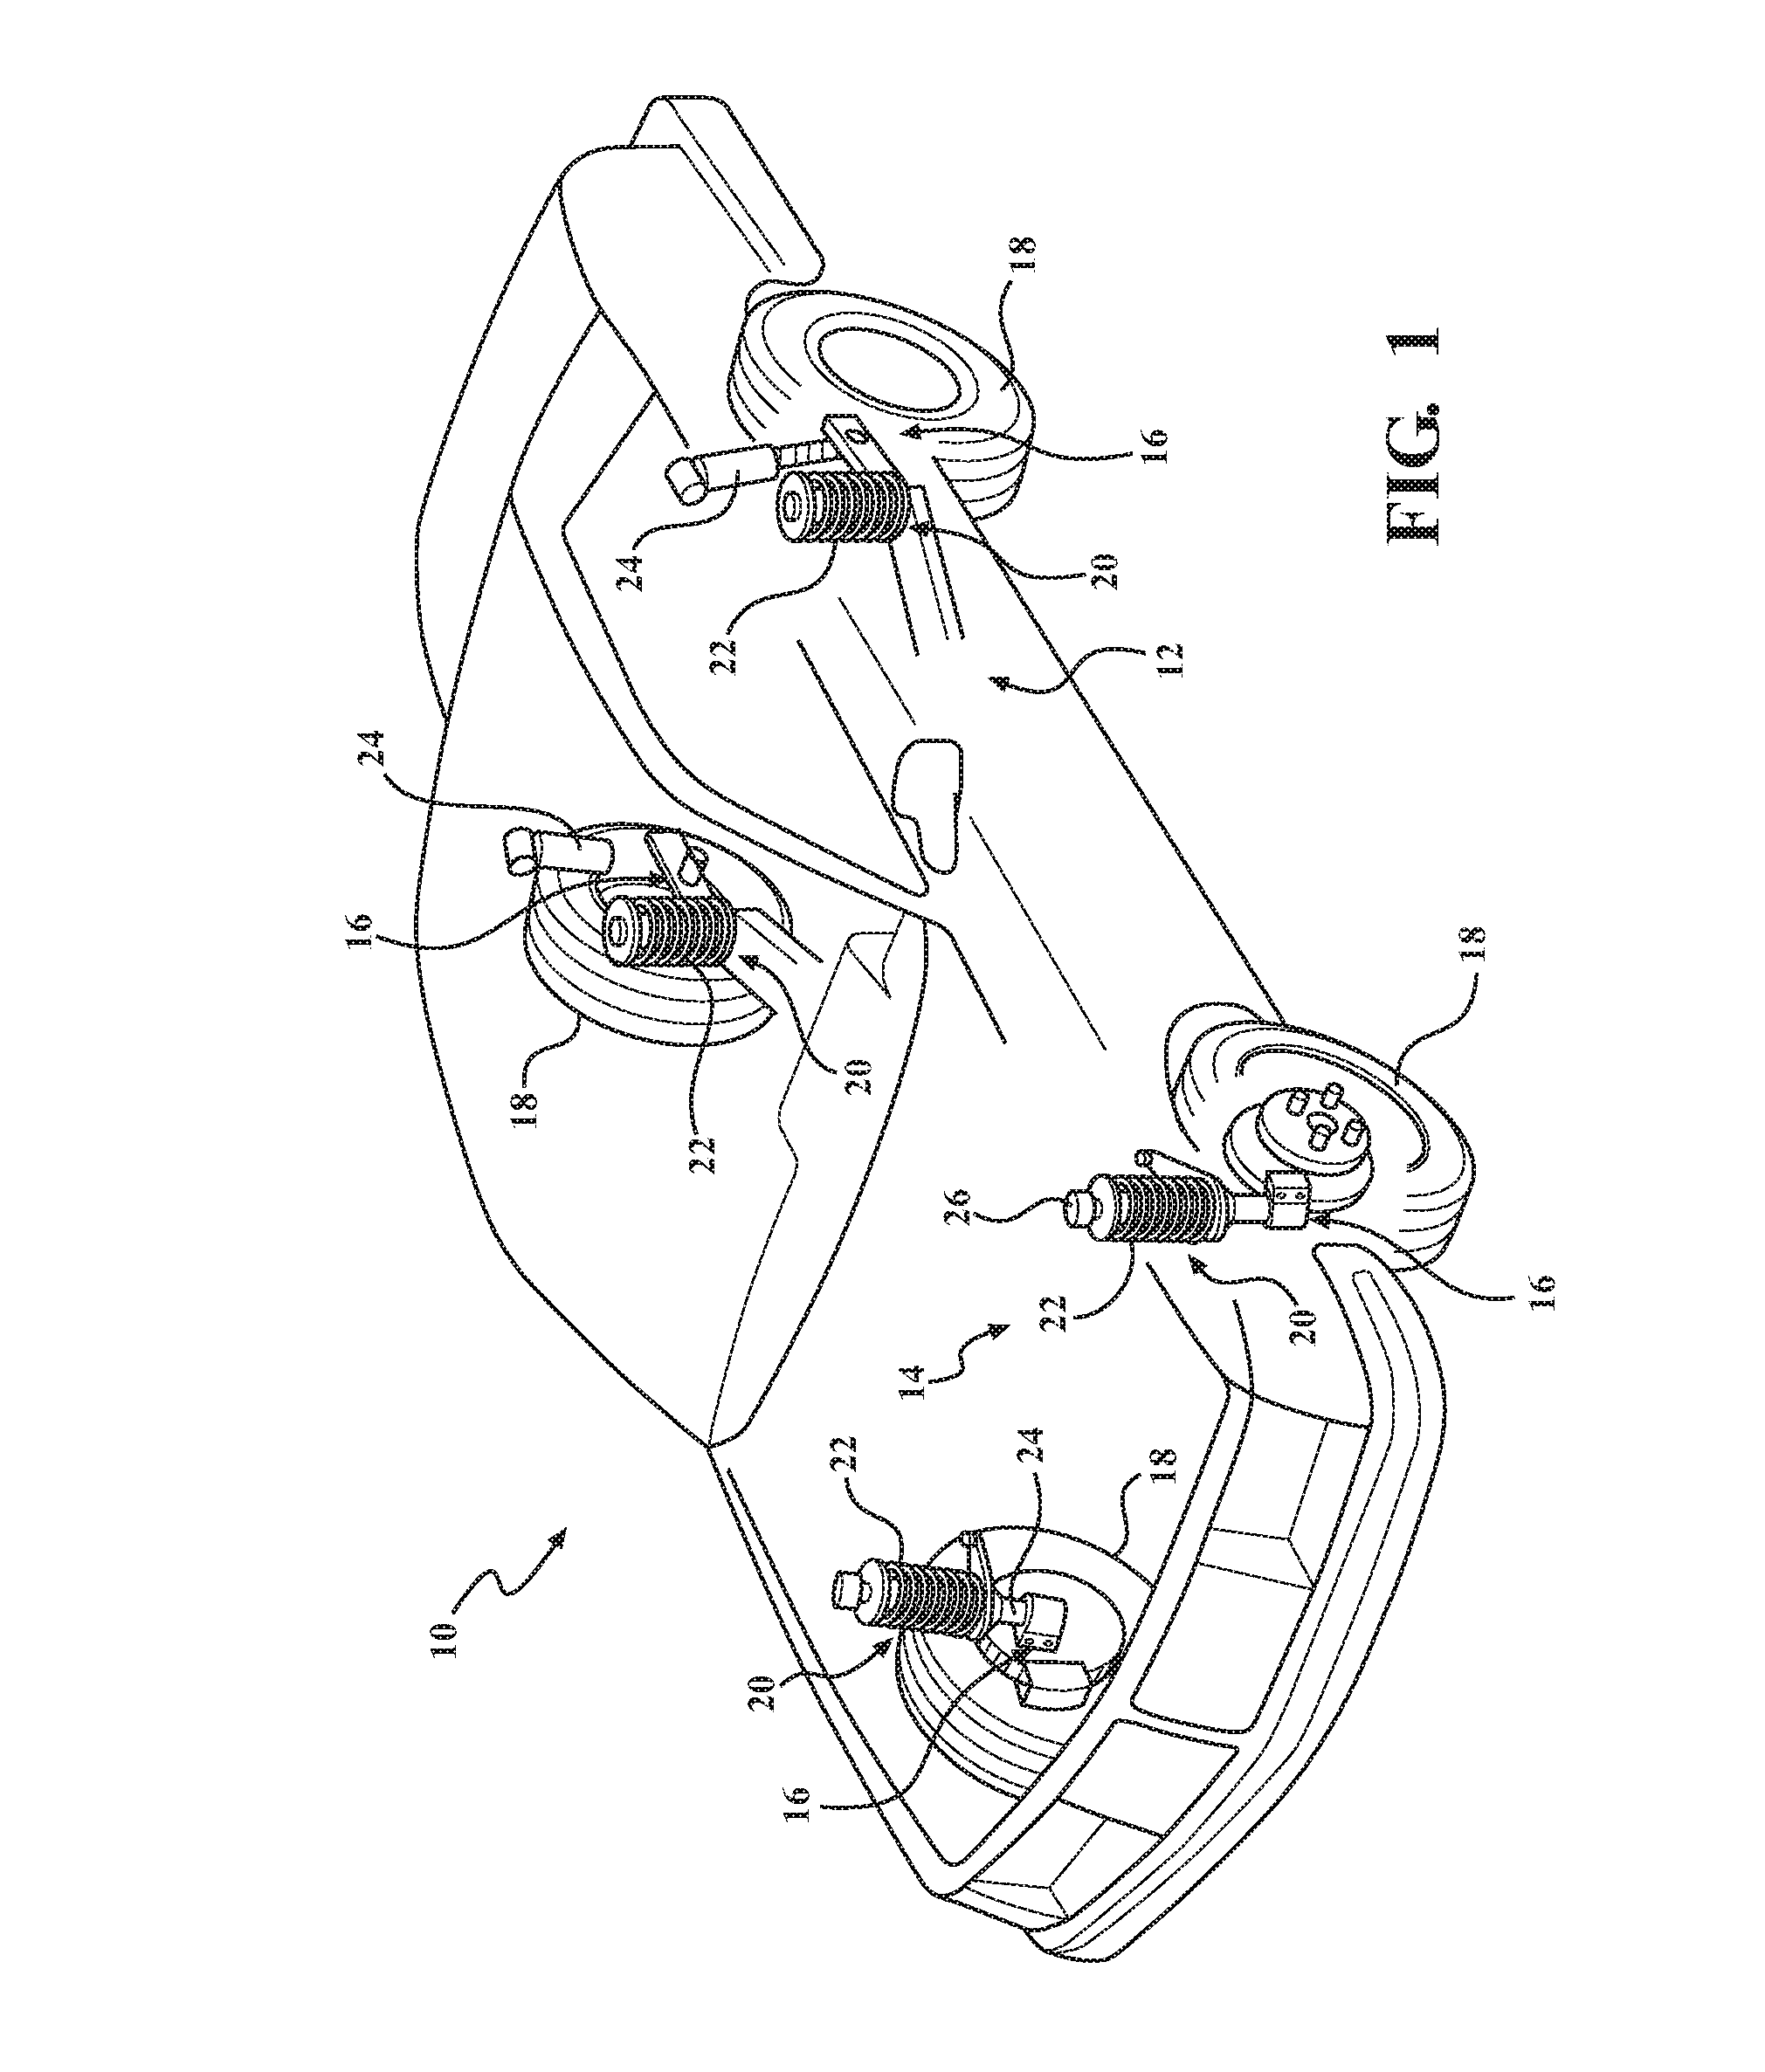 Impact Reinforced Composite Spring Seat for a Shock Absorber